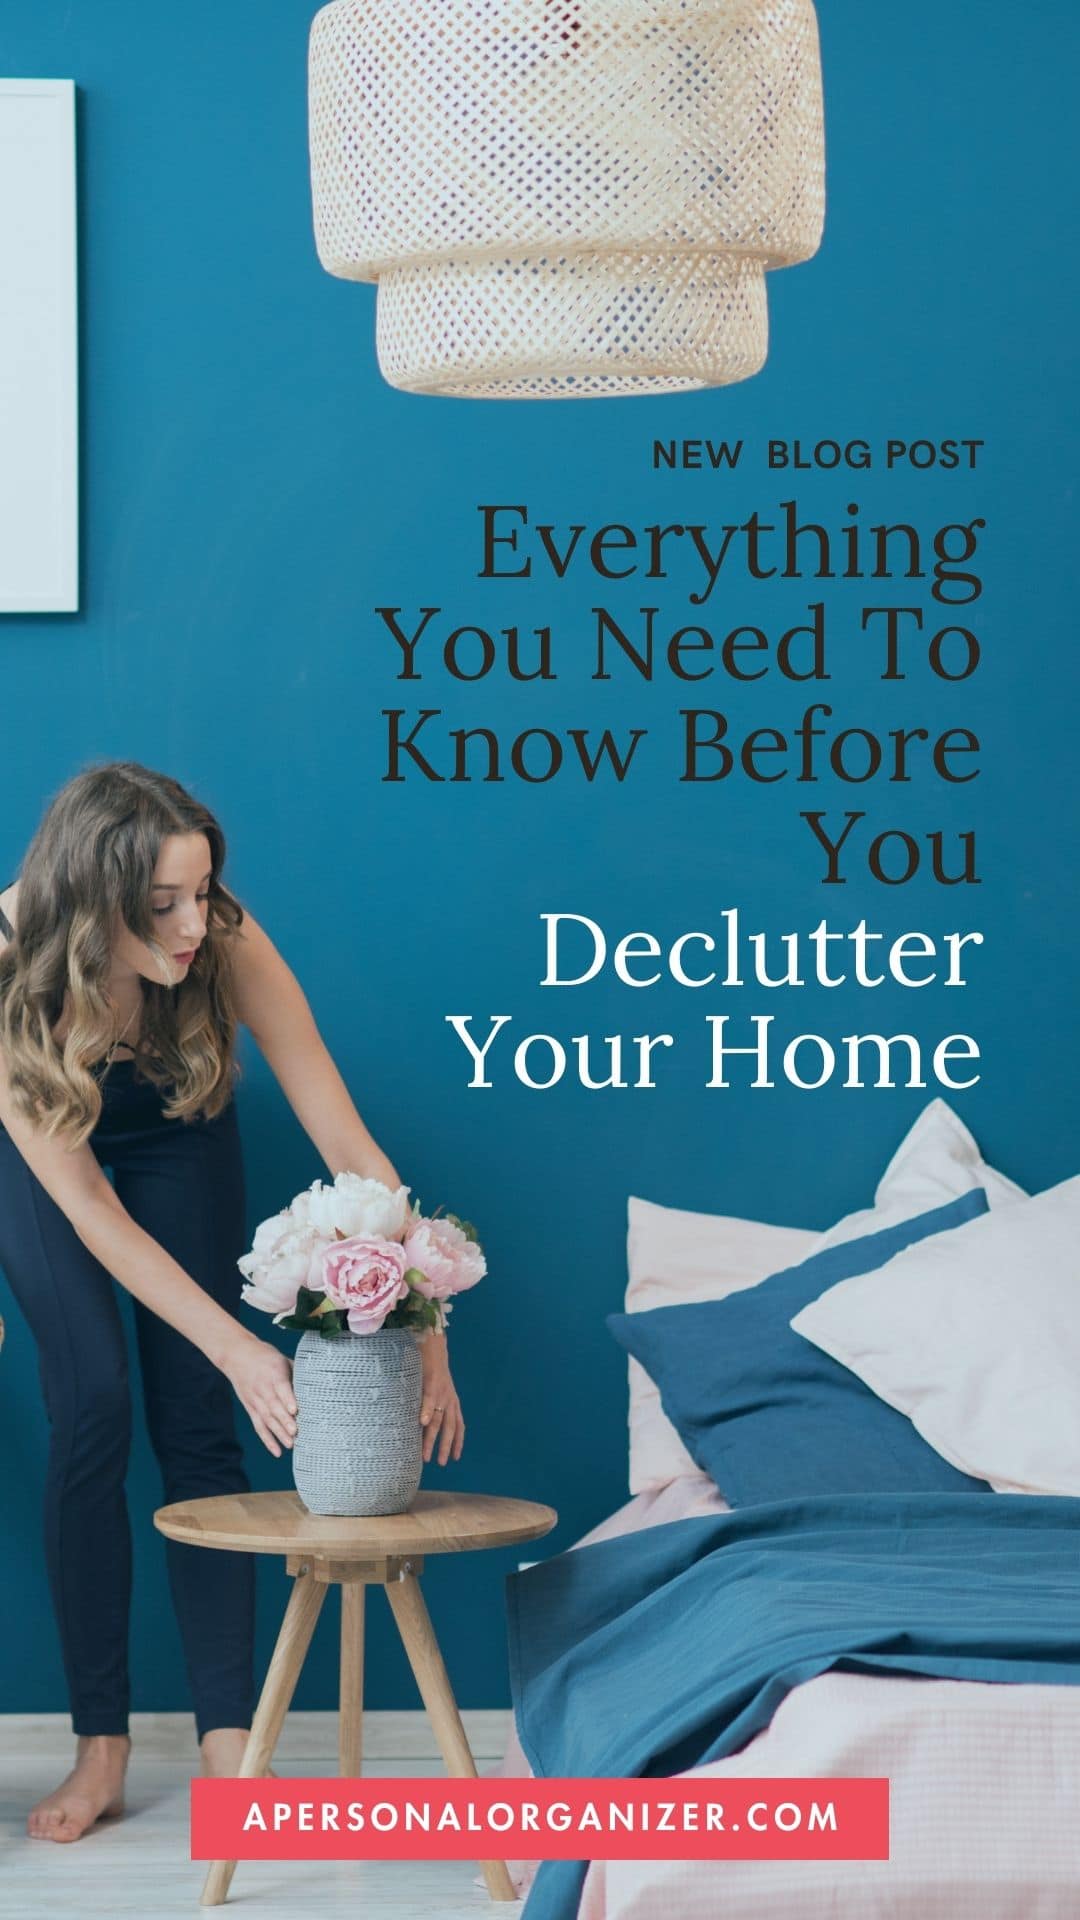 https://apersonalorganizer.com/wp-content/uploads/2021/12/Everything-you-need-to-know-before-you-declutter-your-home-3.jpg